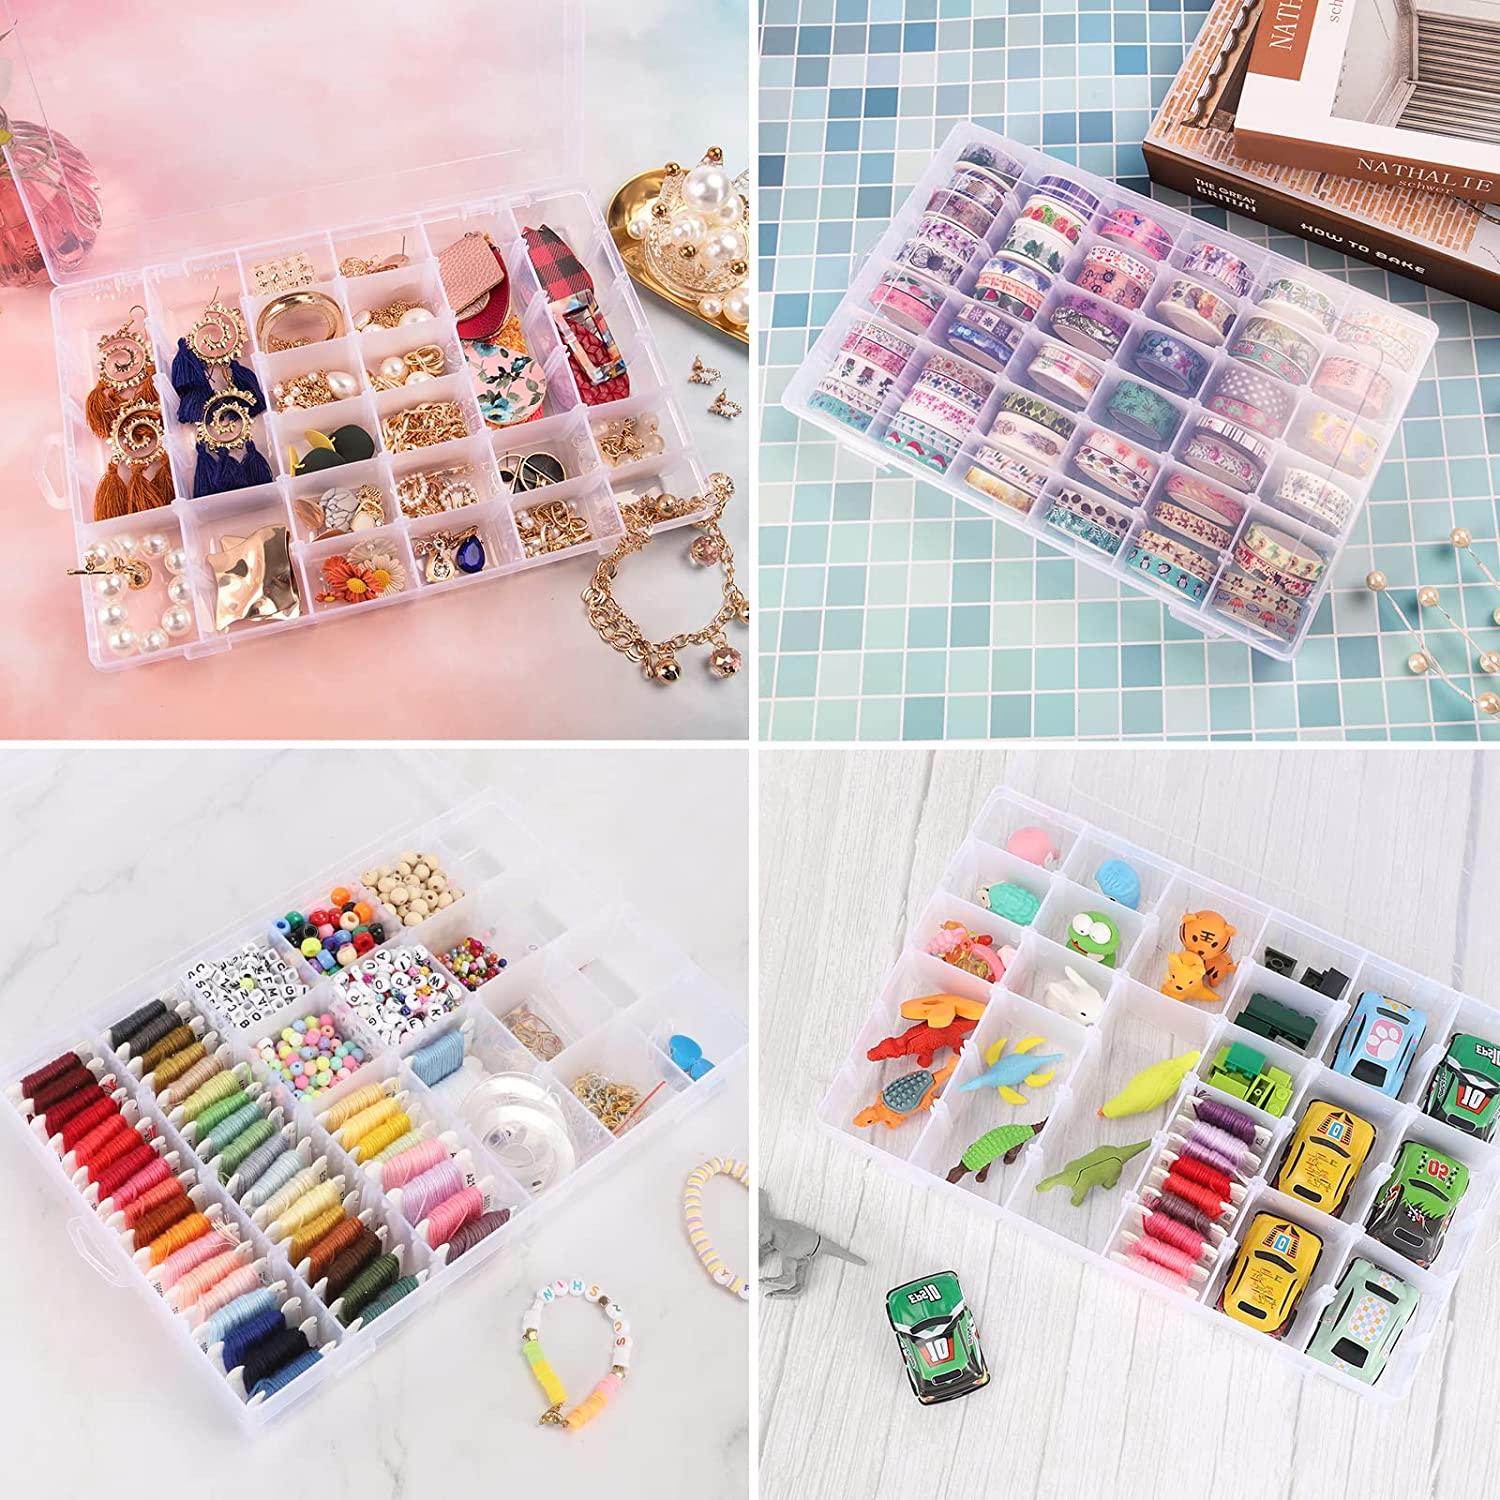  Opret 2 Pack 36 Grids Plastic Organizer Box Clear Beads Storage  Container Jewelry Box with Adjustable Dividers for Washi Tapes, Thread,  Craft and Rock Collection : Arts, Crafts & Sewing